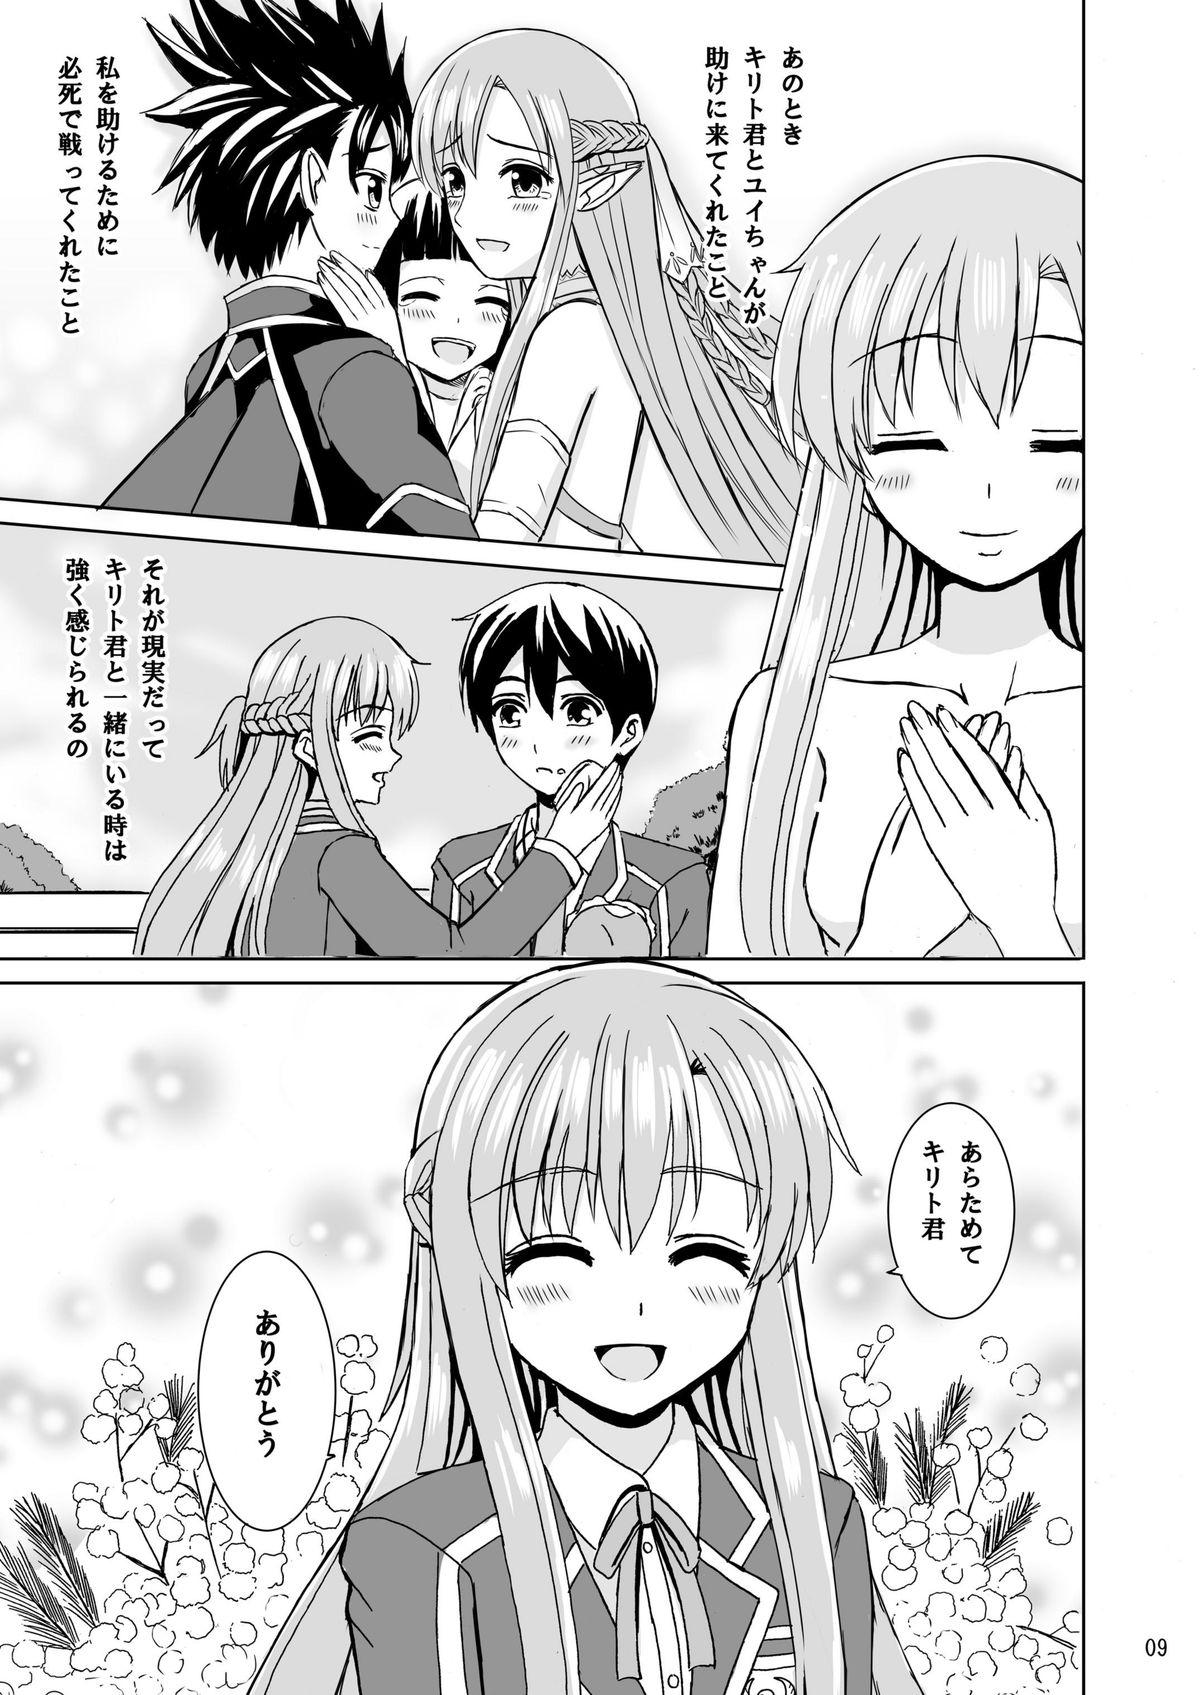 Perra Zutto Kimi to Issho ni - Sword art online Gorgeous - Page 9